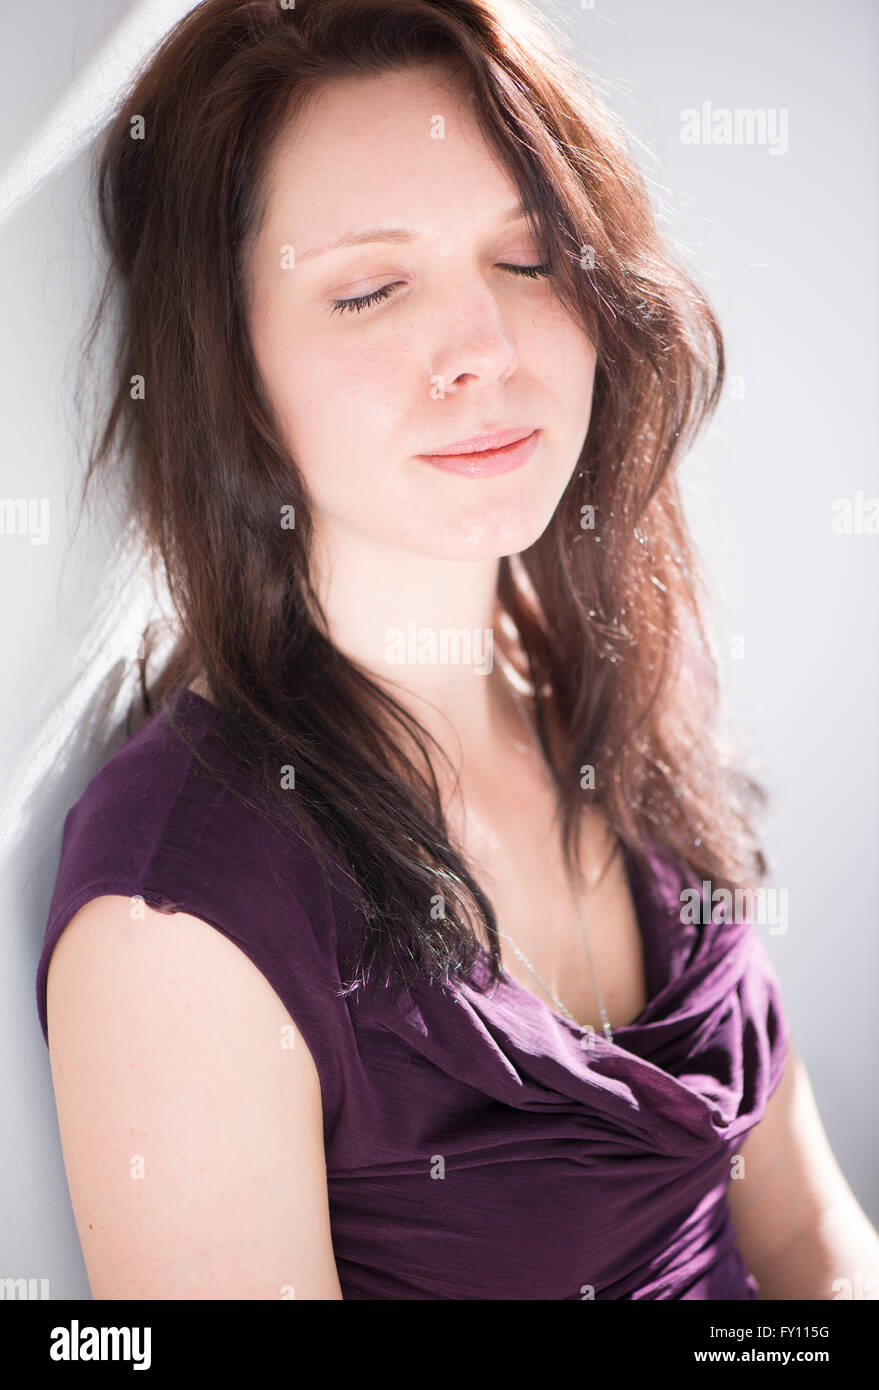 Woman sitting with eyes closed. Lifestyle image of young woman showing relaxation, contemplation and contentment. Stock Photo